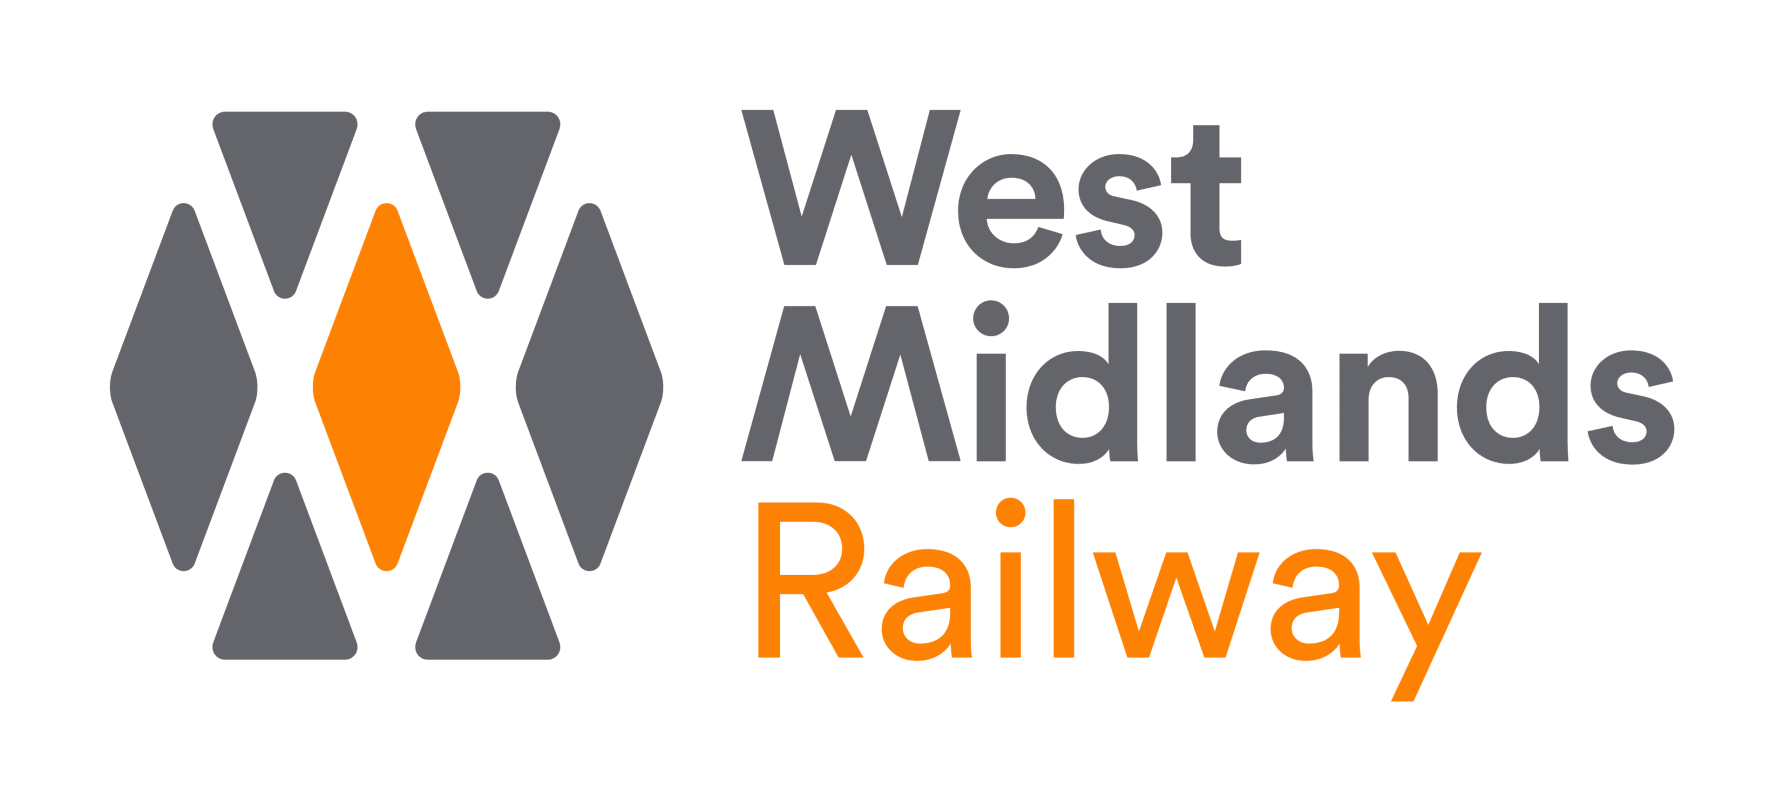 West Midlands Railway issues Christmas travel reminder